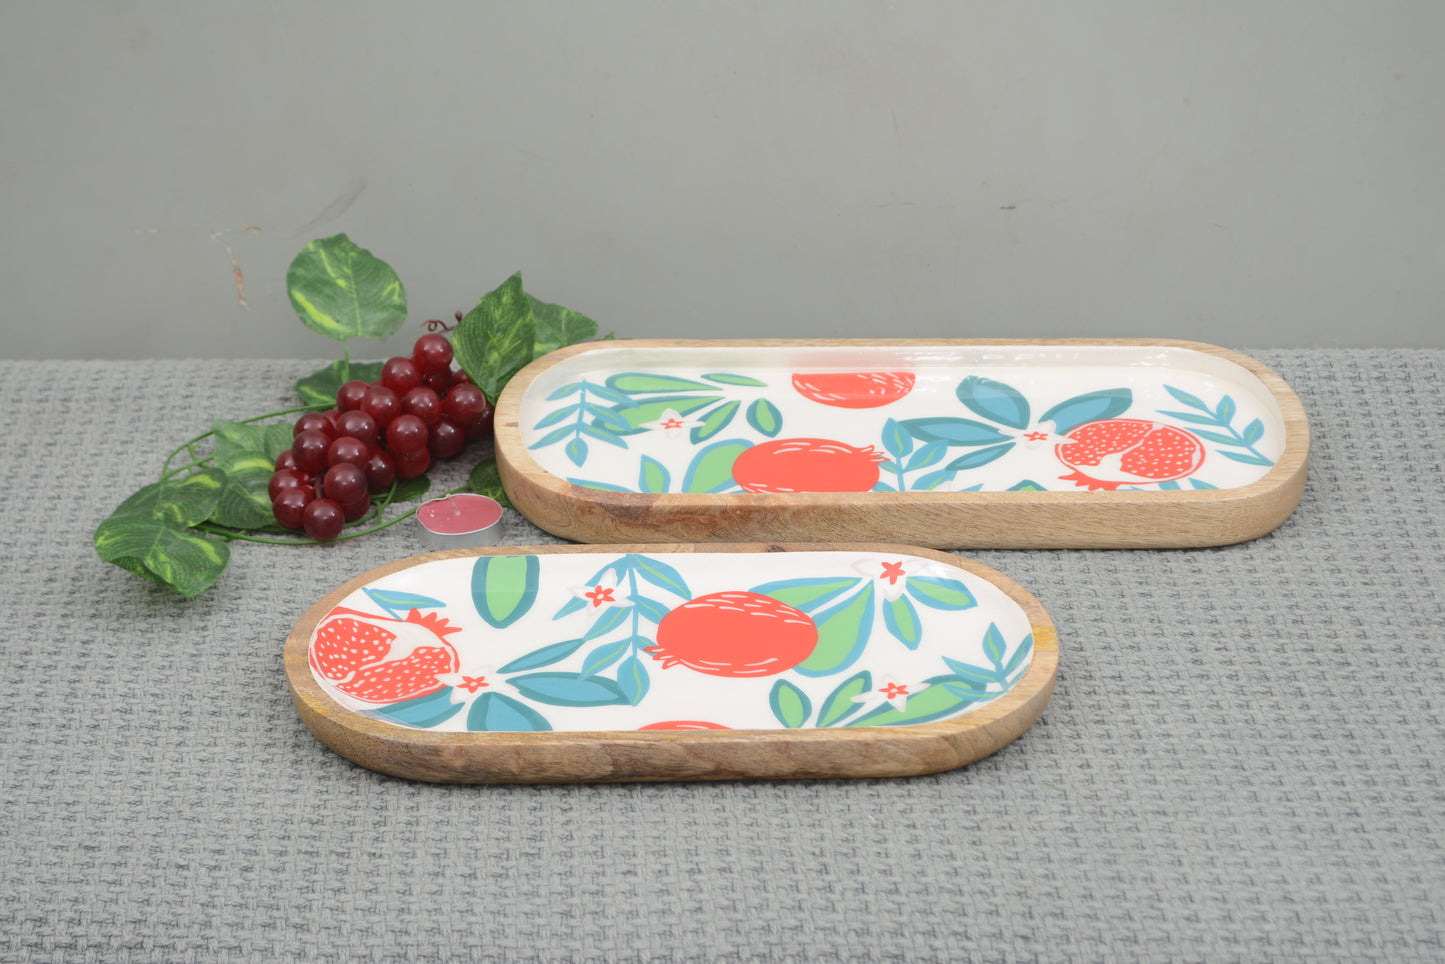 Hand Painted Fruit Oval Platter With Enamel